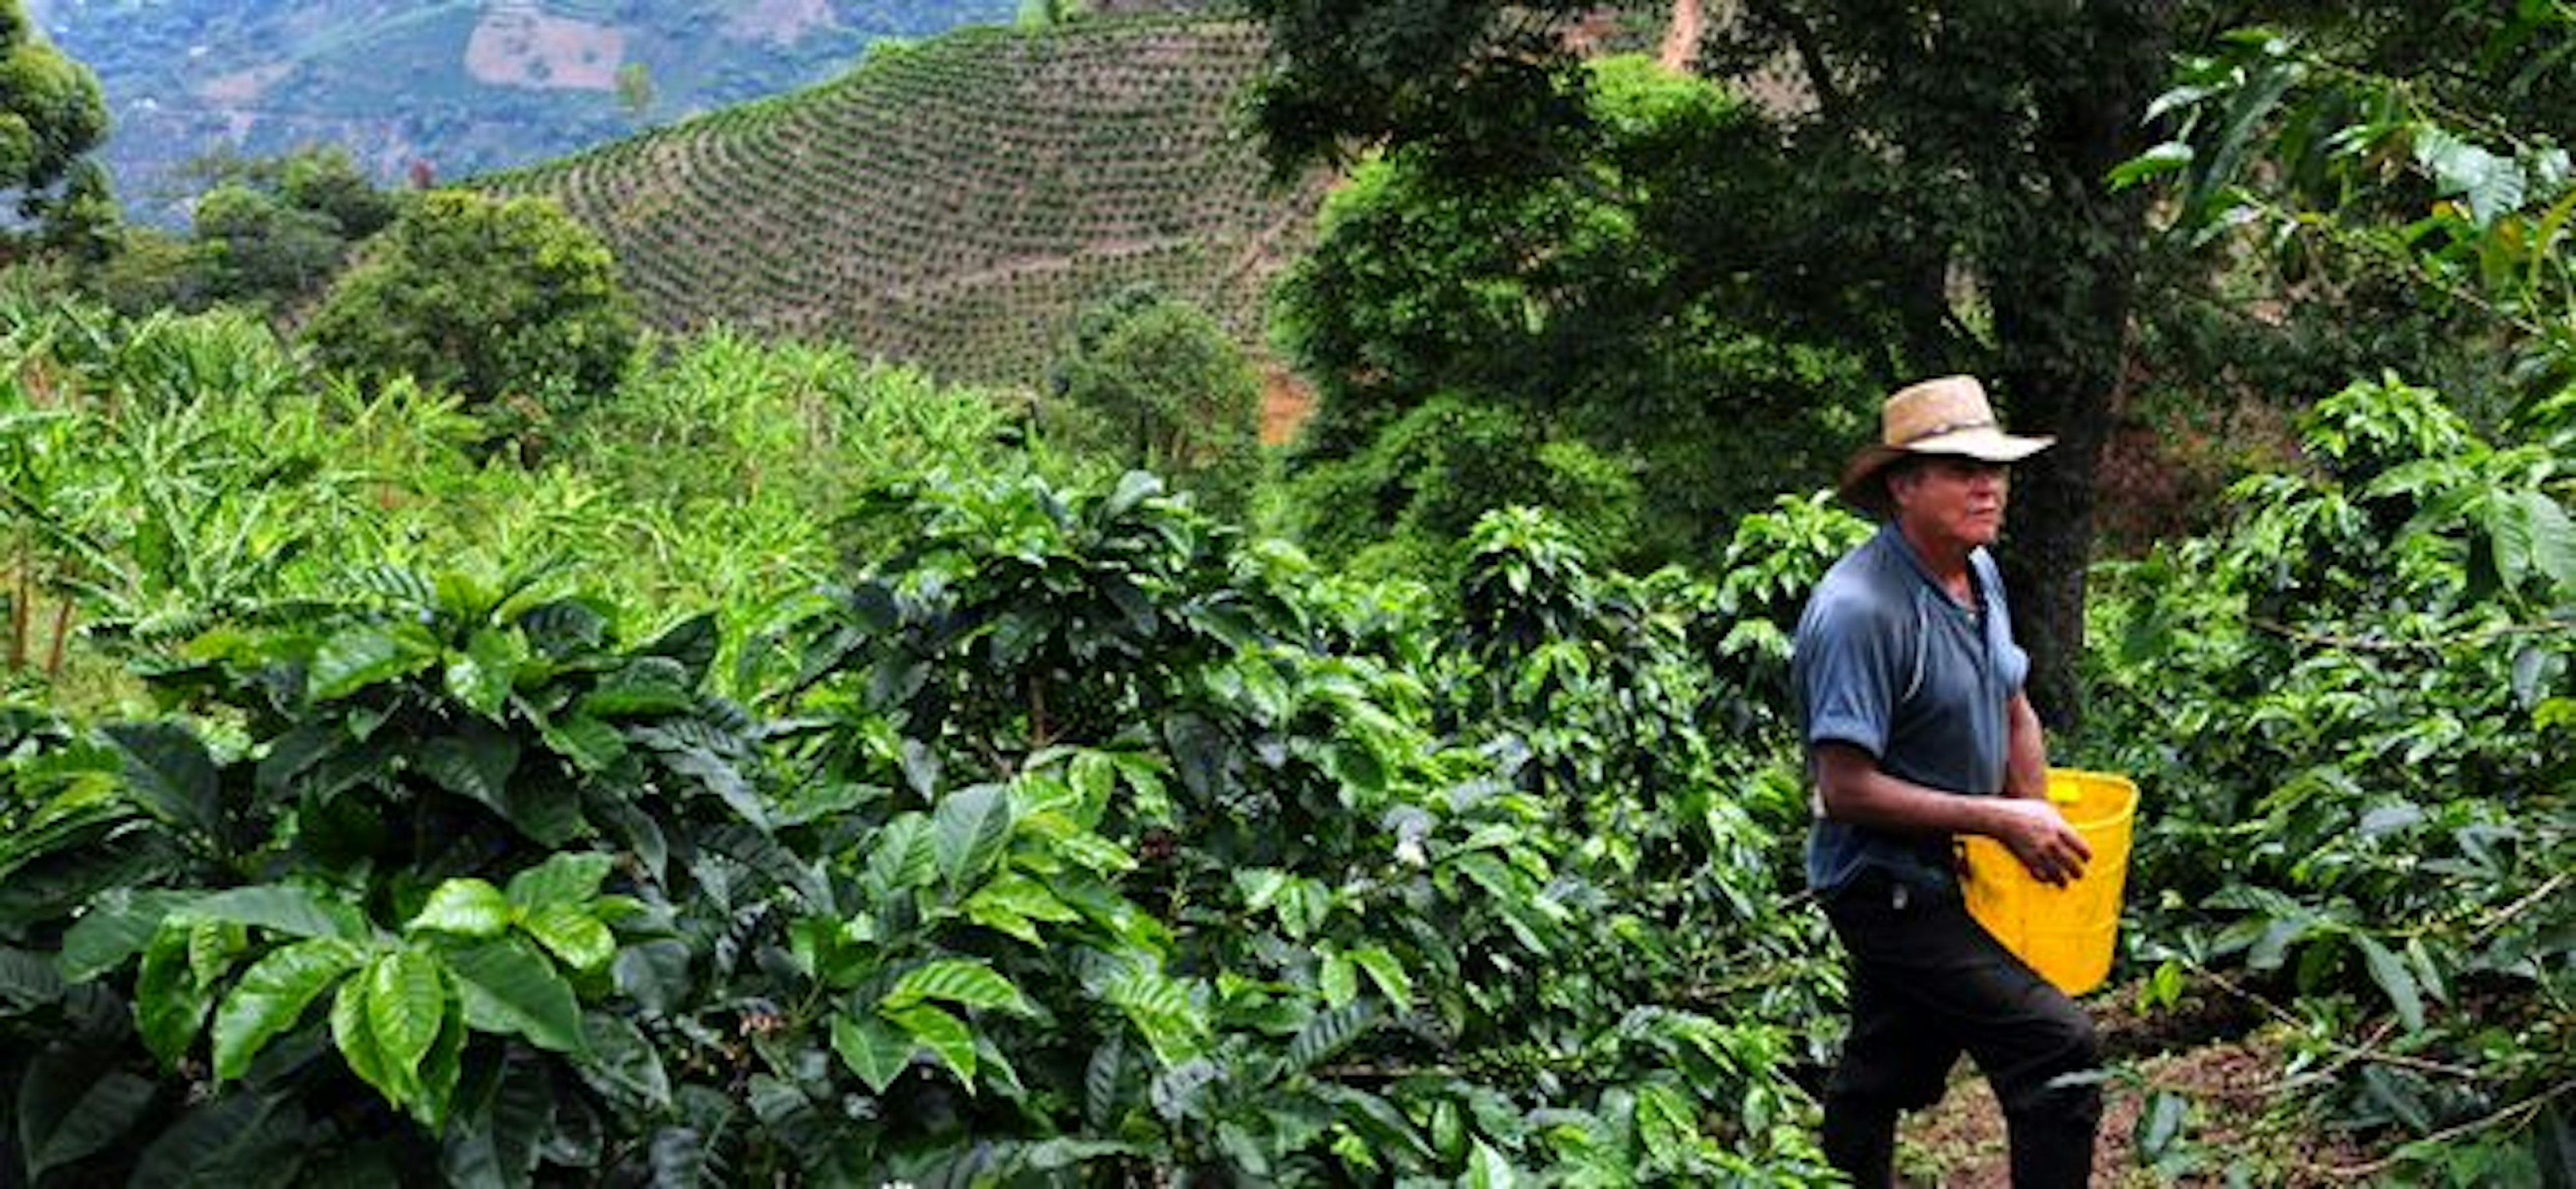 Worker harvesting coffee beans, Colombia